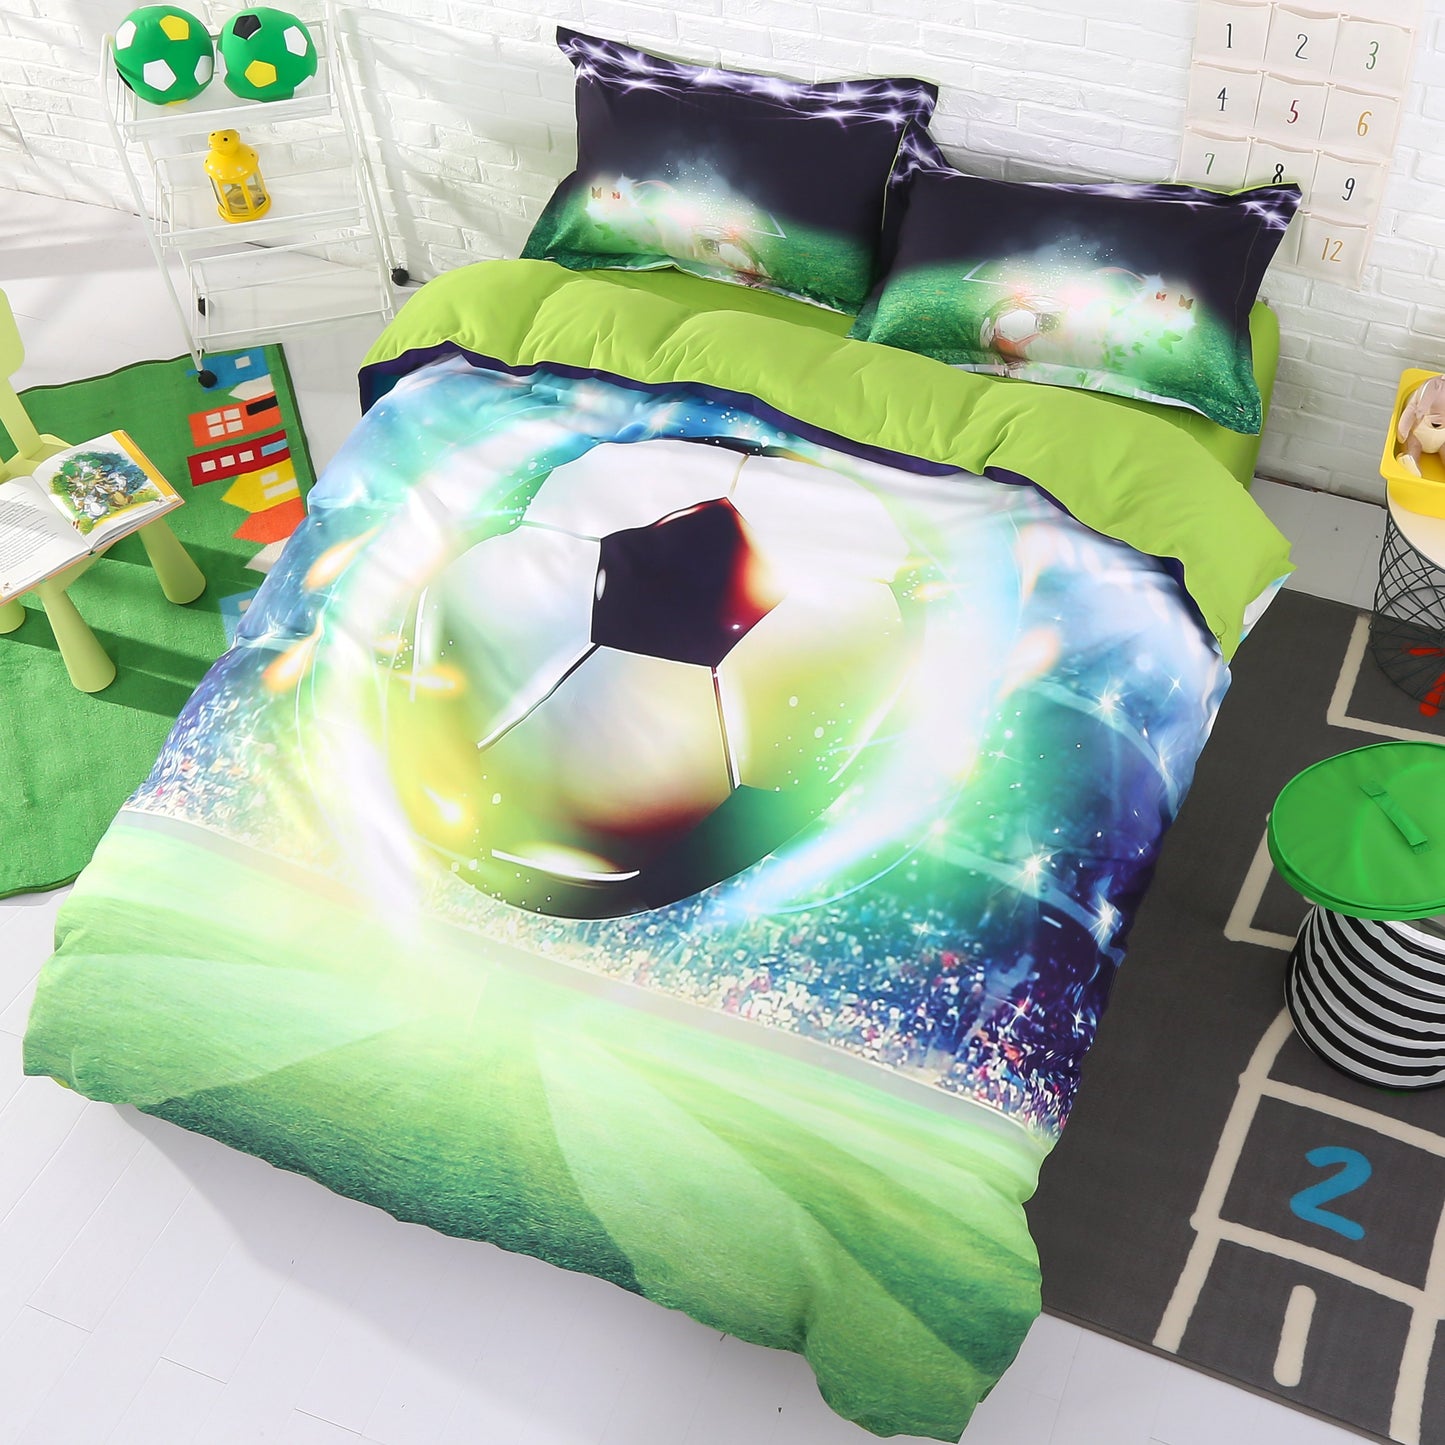 Soccer Print Bedding, Soccer Ball in Halo 4-Piece Duvet Cover Set Microfiber with Flat Sheet 2 Piilowcases